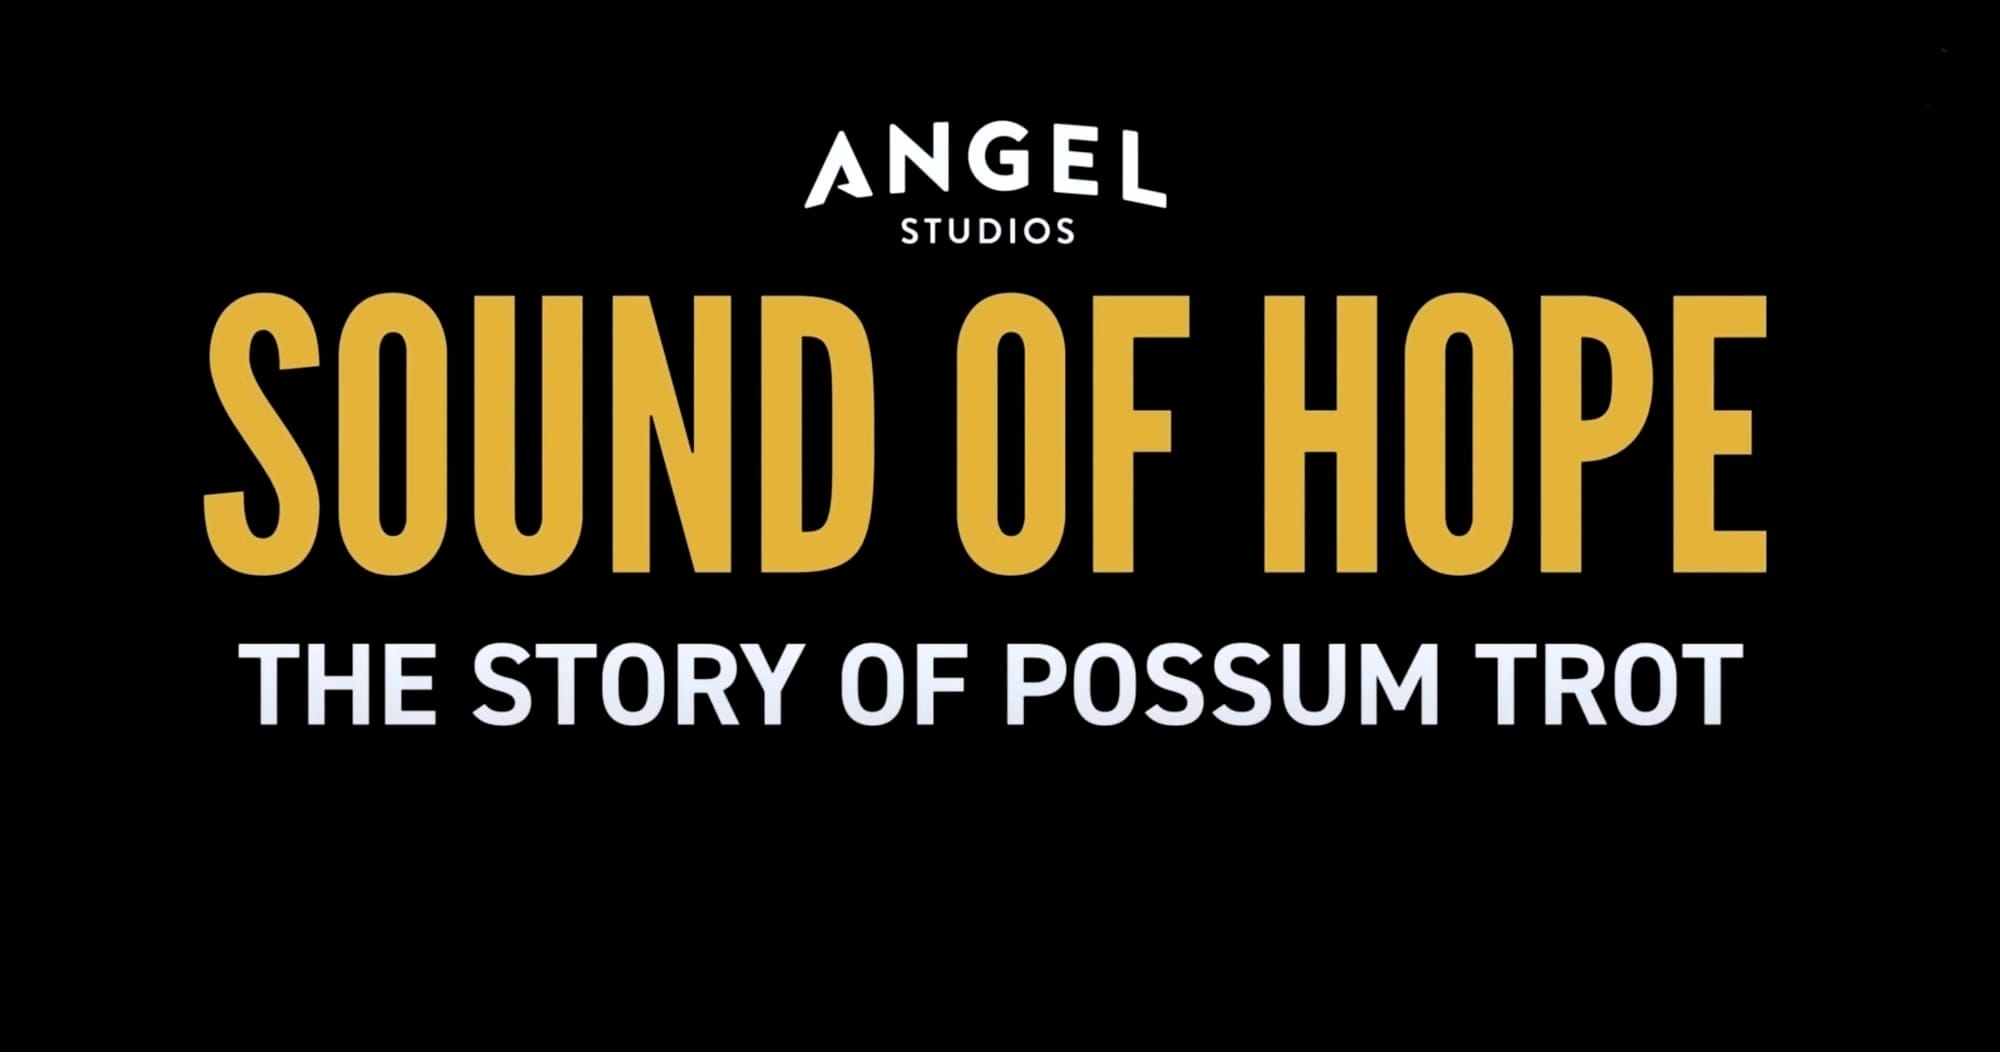 Angel Studios Starts A Fight For Our Children's Future With 'Sound of Hope'